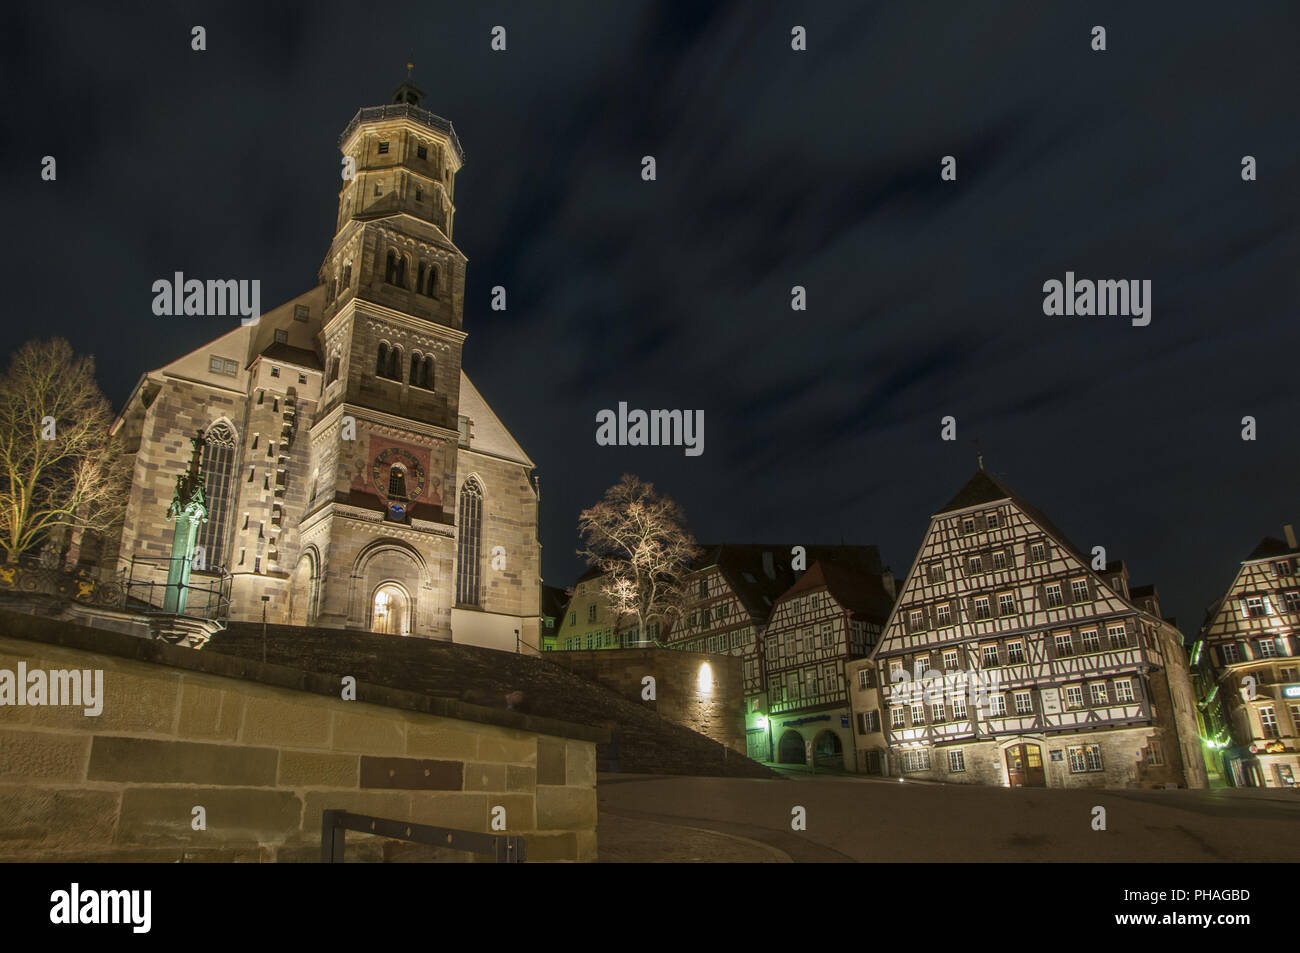 Market place in Schwaebisch Hall by Night, Germany Stock Photo